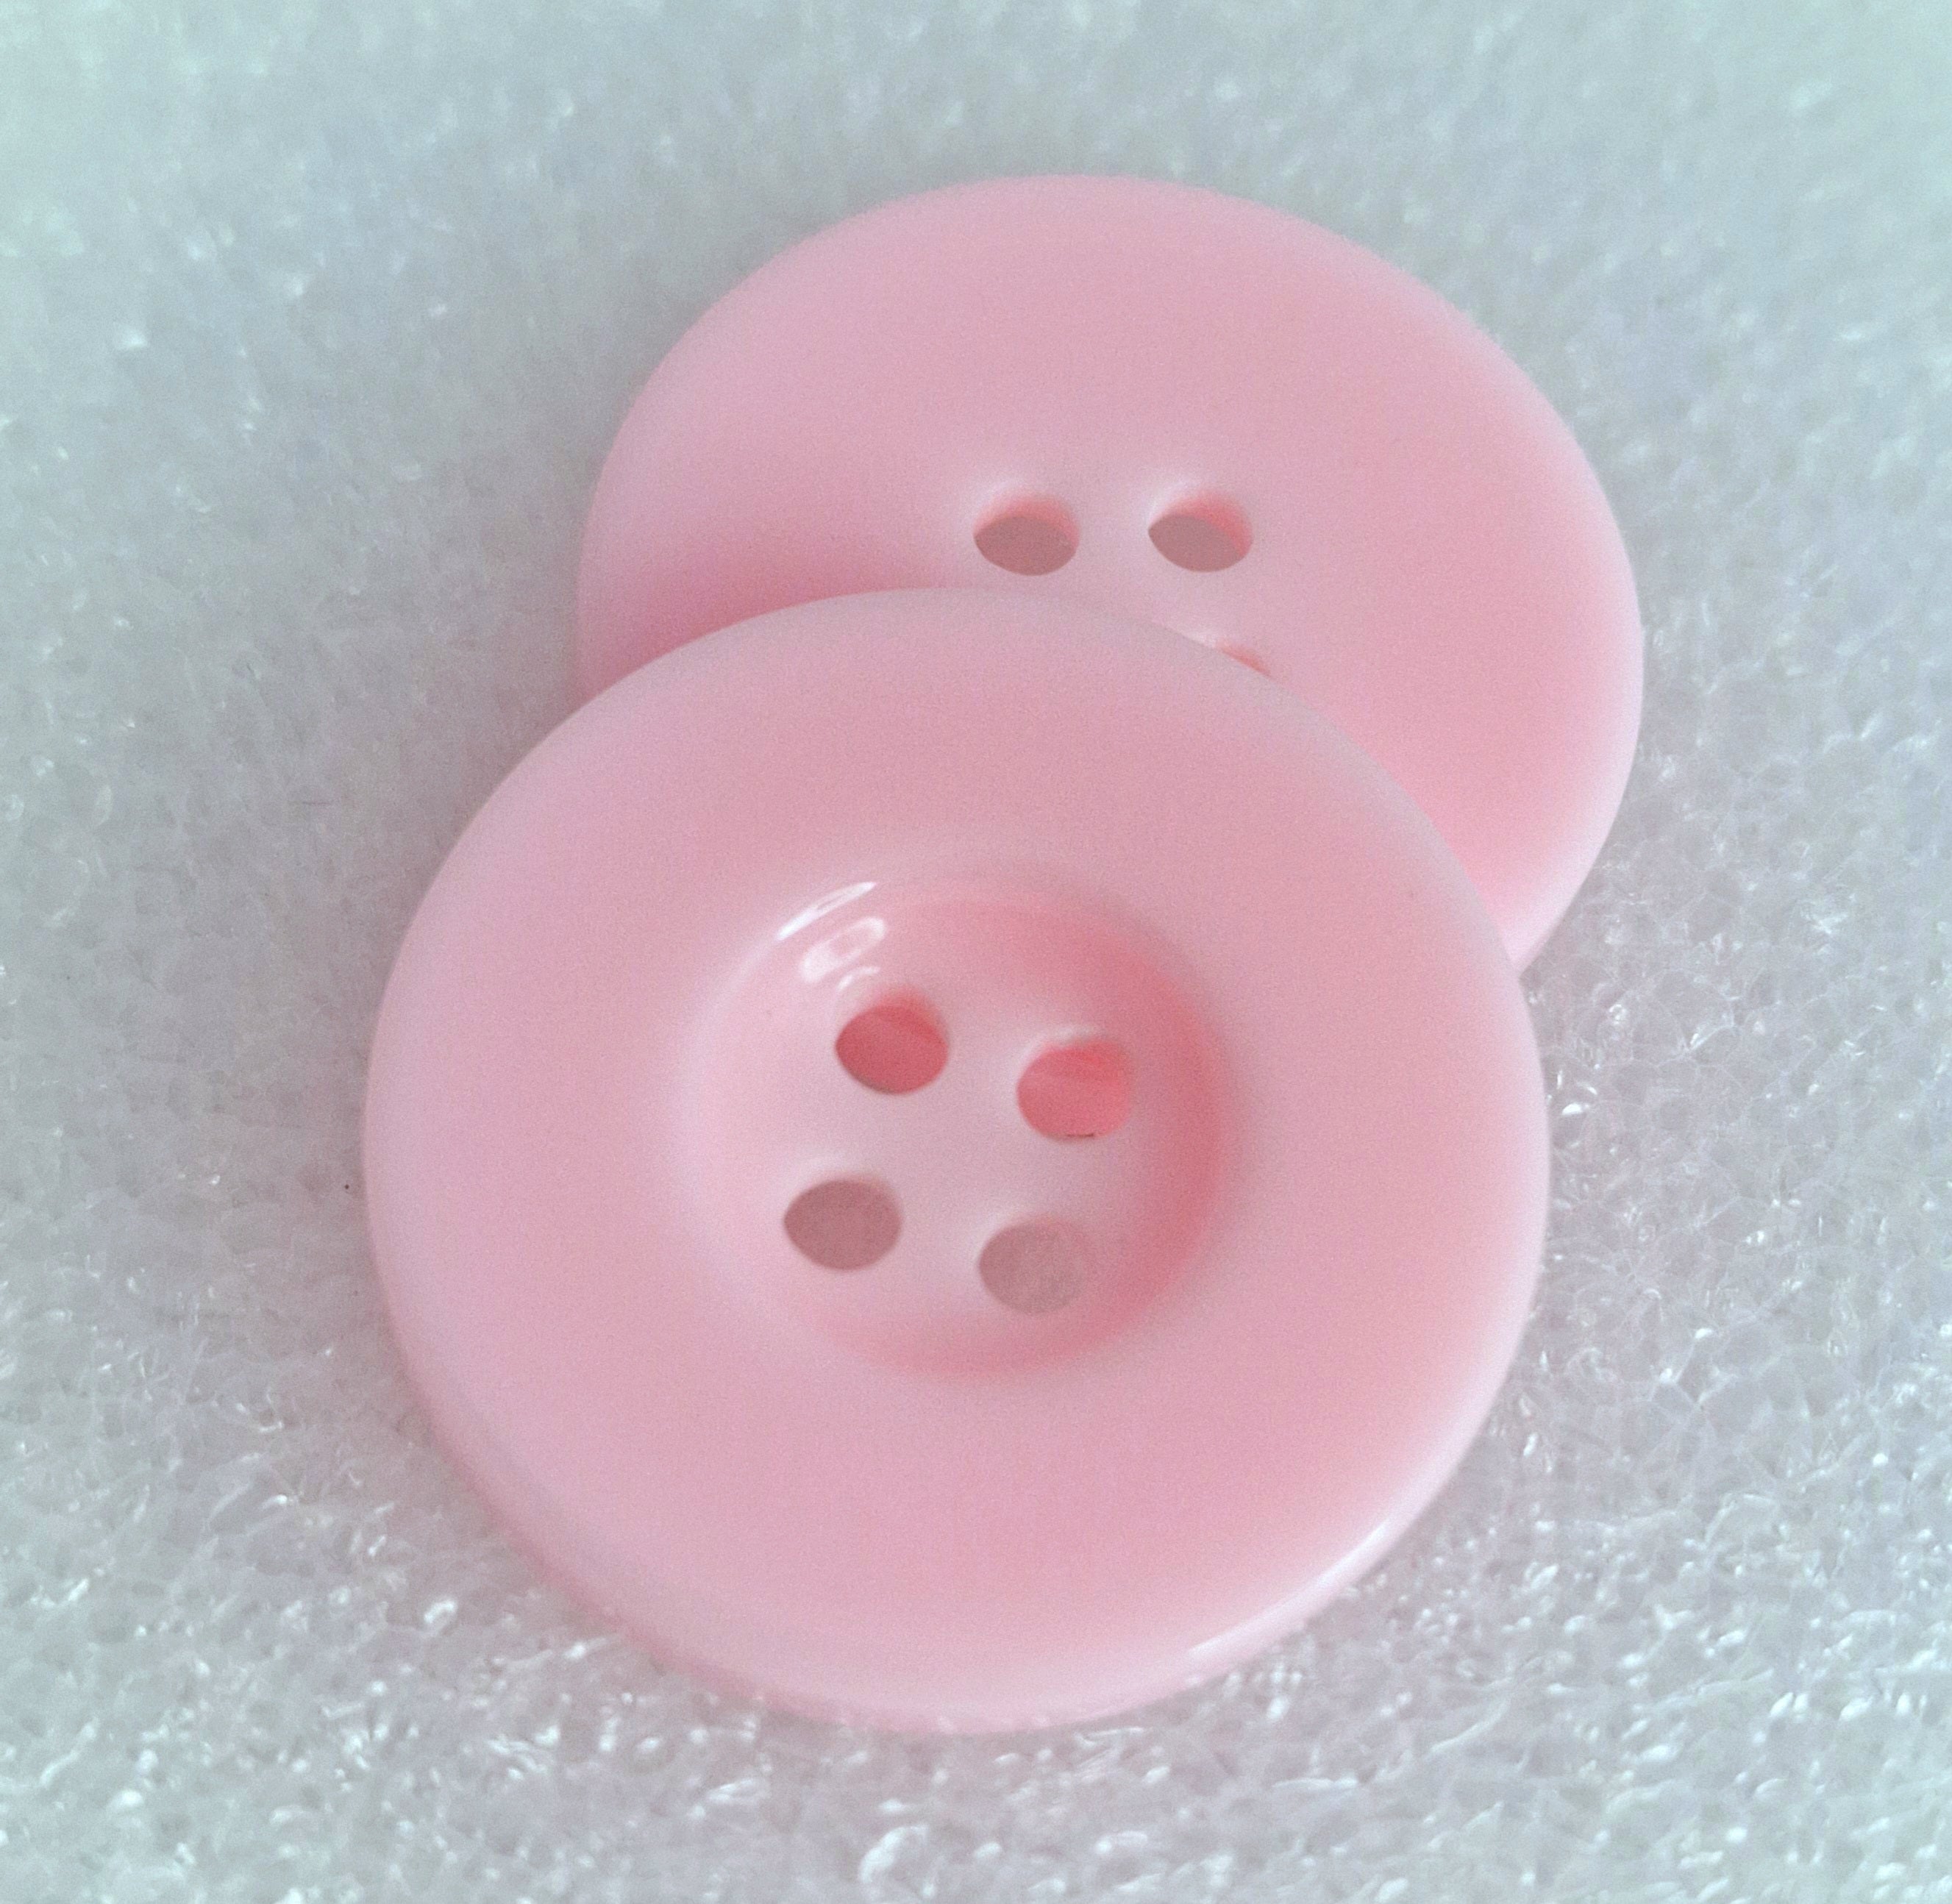 MajorCrafts 16pcs 25mm Light Pink 4 Holes Round Resin Sewing Buttons